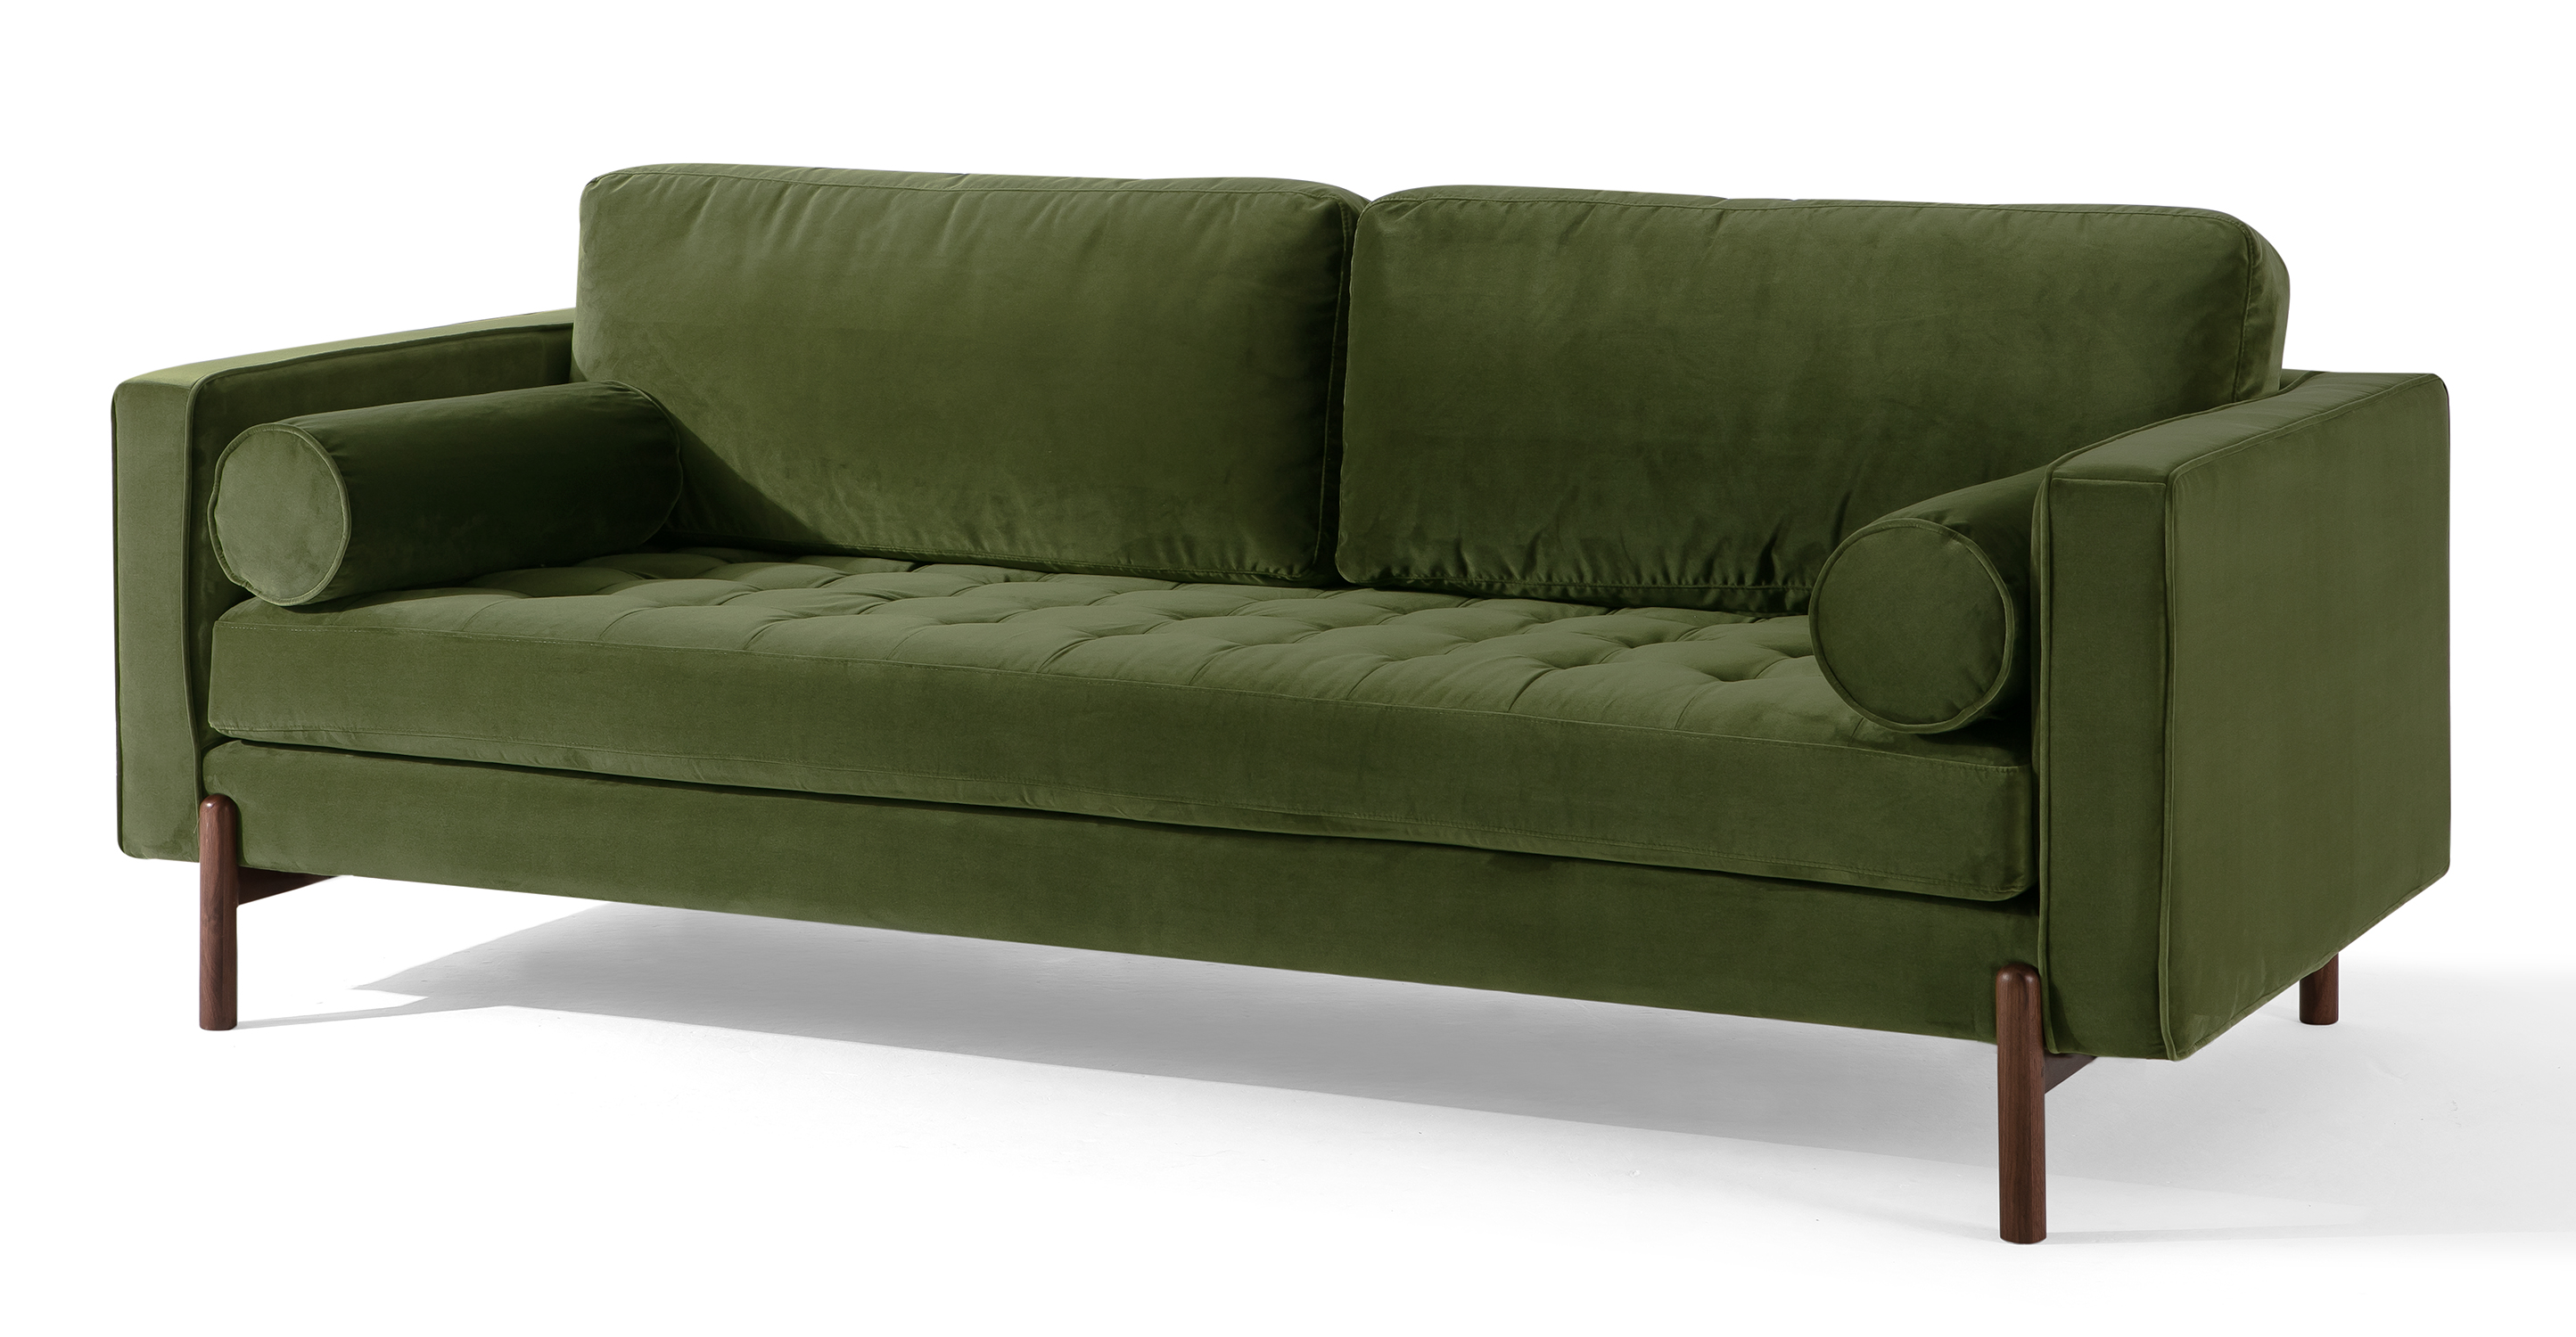 Dwell Fern modern sofa is 100% upholstered and features squared piping arms that meet two squared back cushions, creating a sleek and contemporary design. It comes with a single removable tufted seat cushion for added comfort, along with two bolsters on the sides to provide extra support. The two back cushions are also removable and extends beyond the chair frame, adding an interesting visual element. Four wooden leg supports add a touch of natural warmth and stability to the overall look.